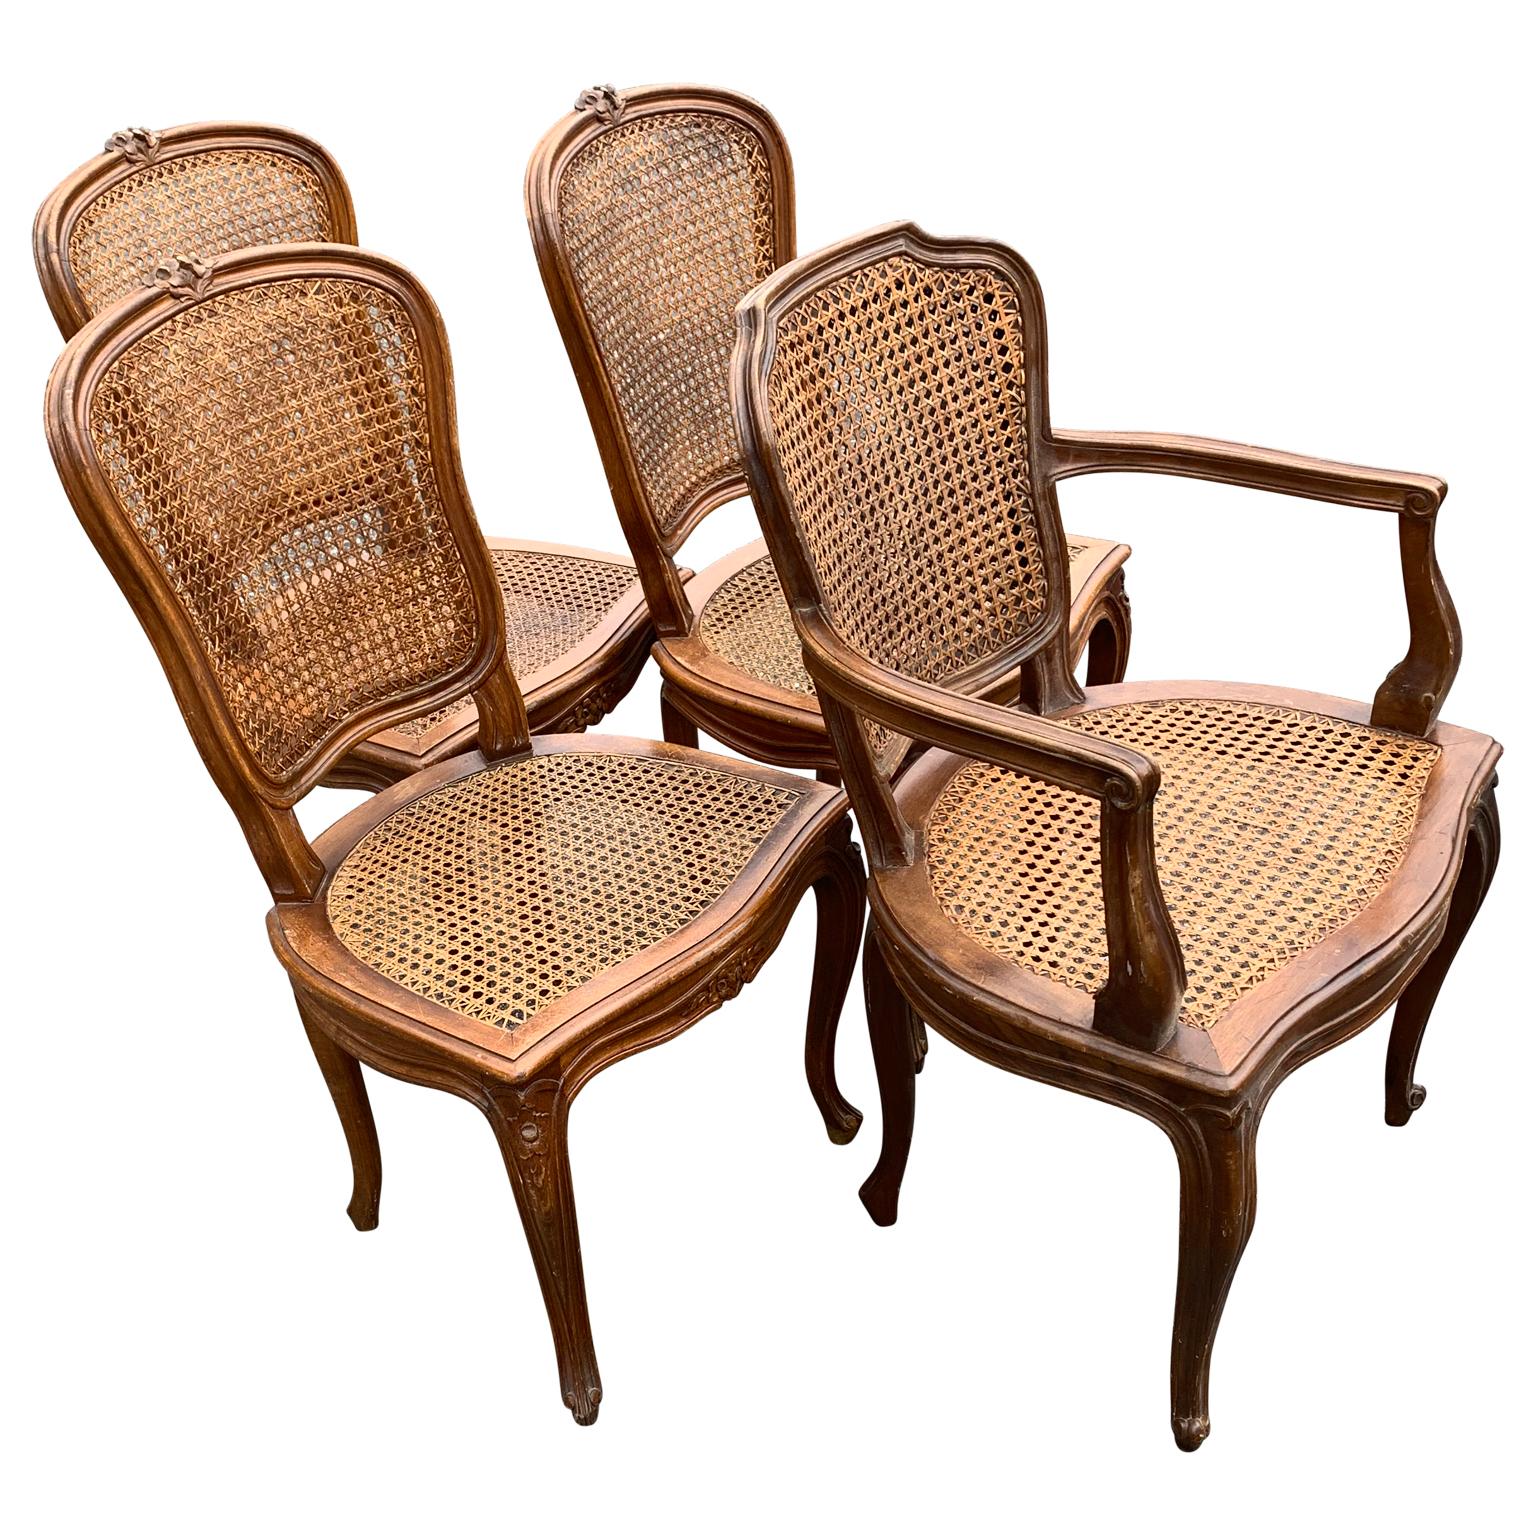 Set of 4 Italian Rococo style dining room chairs

Caning and sturdiness of chairs is in good working conditions

Complimentary front door delivery includes most areas of Washington DC metro, Baltimore, Philadelphia, New Jersey, New York and